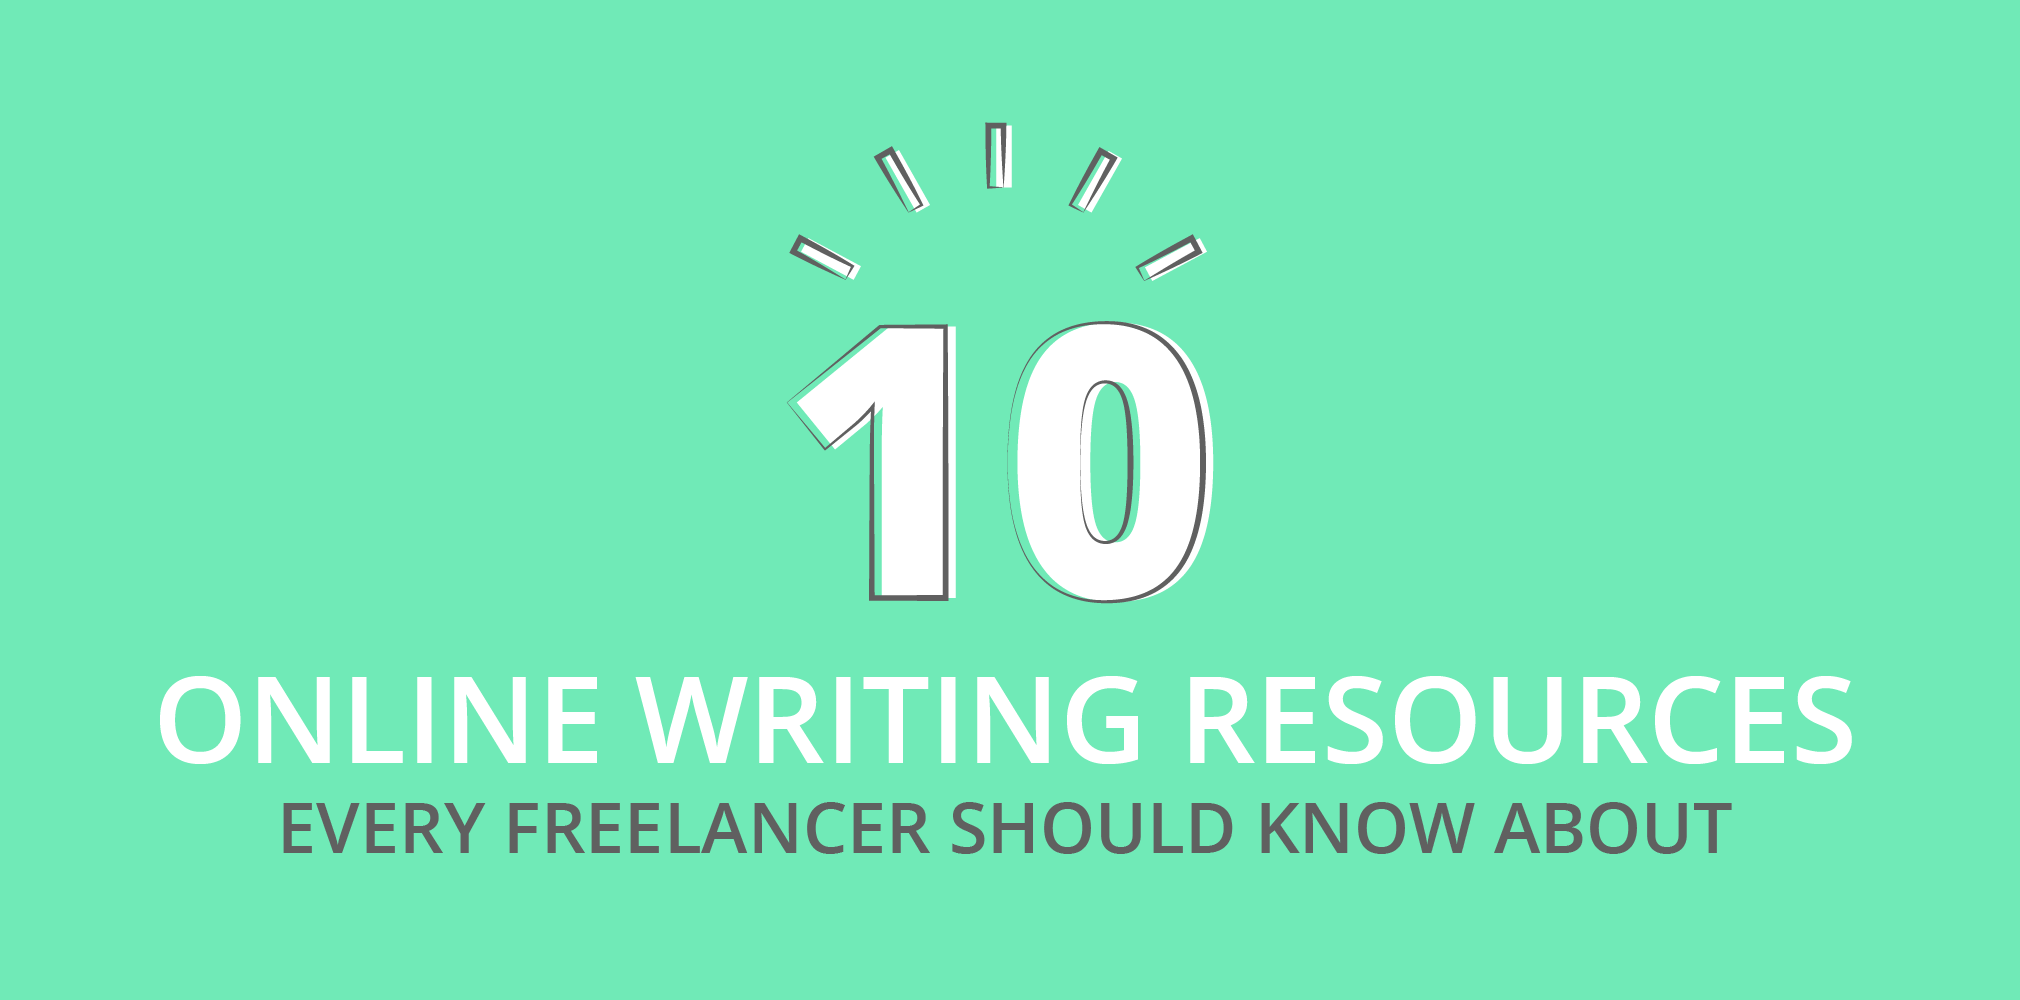 10 online resources every freelance writer should know about